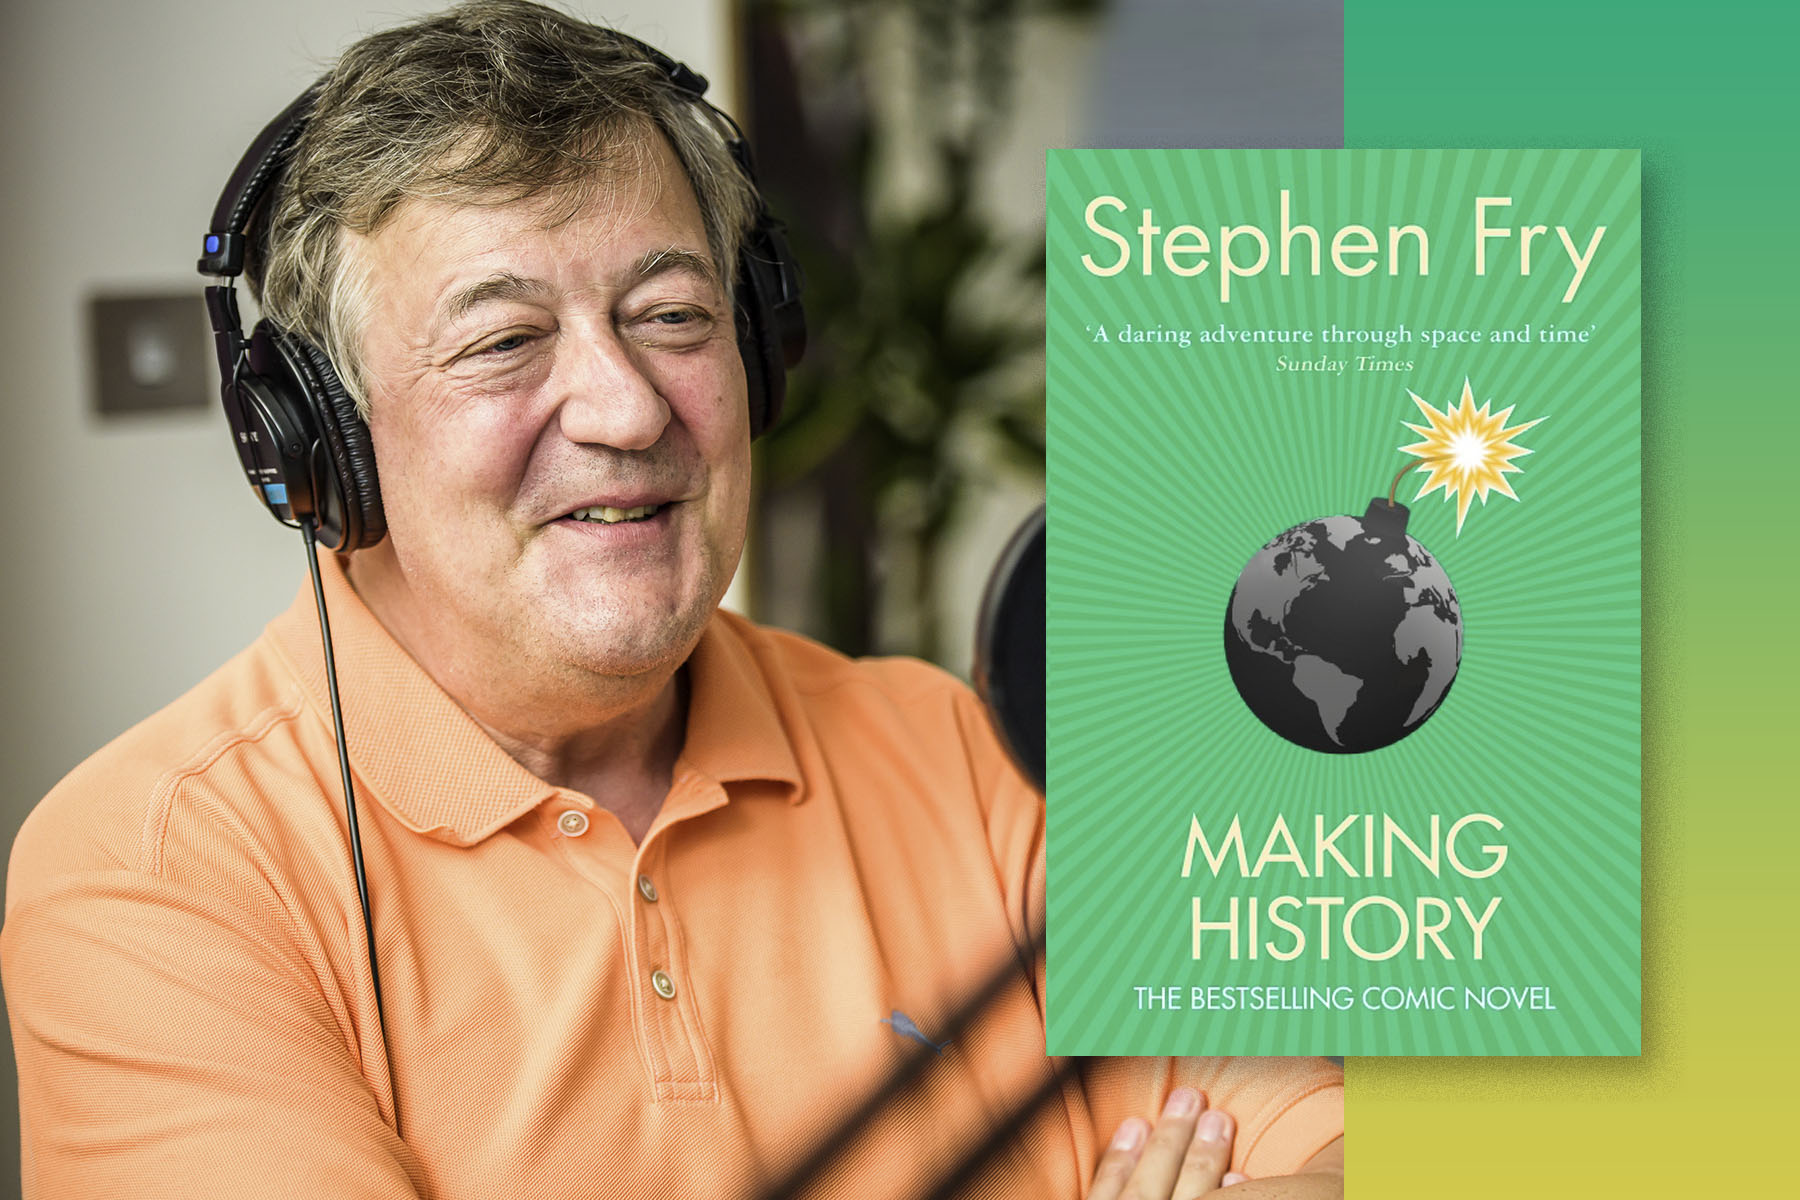 Stephen Fry recording the audiobook for Making History